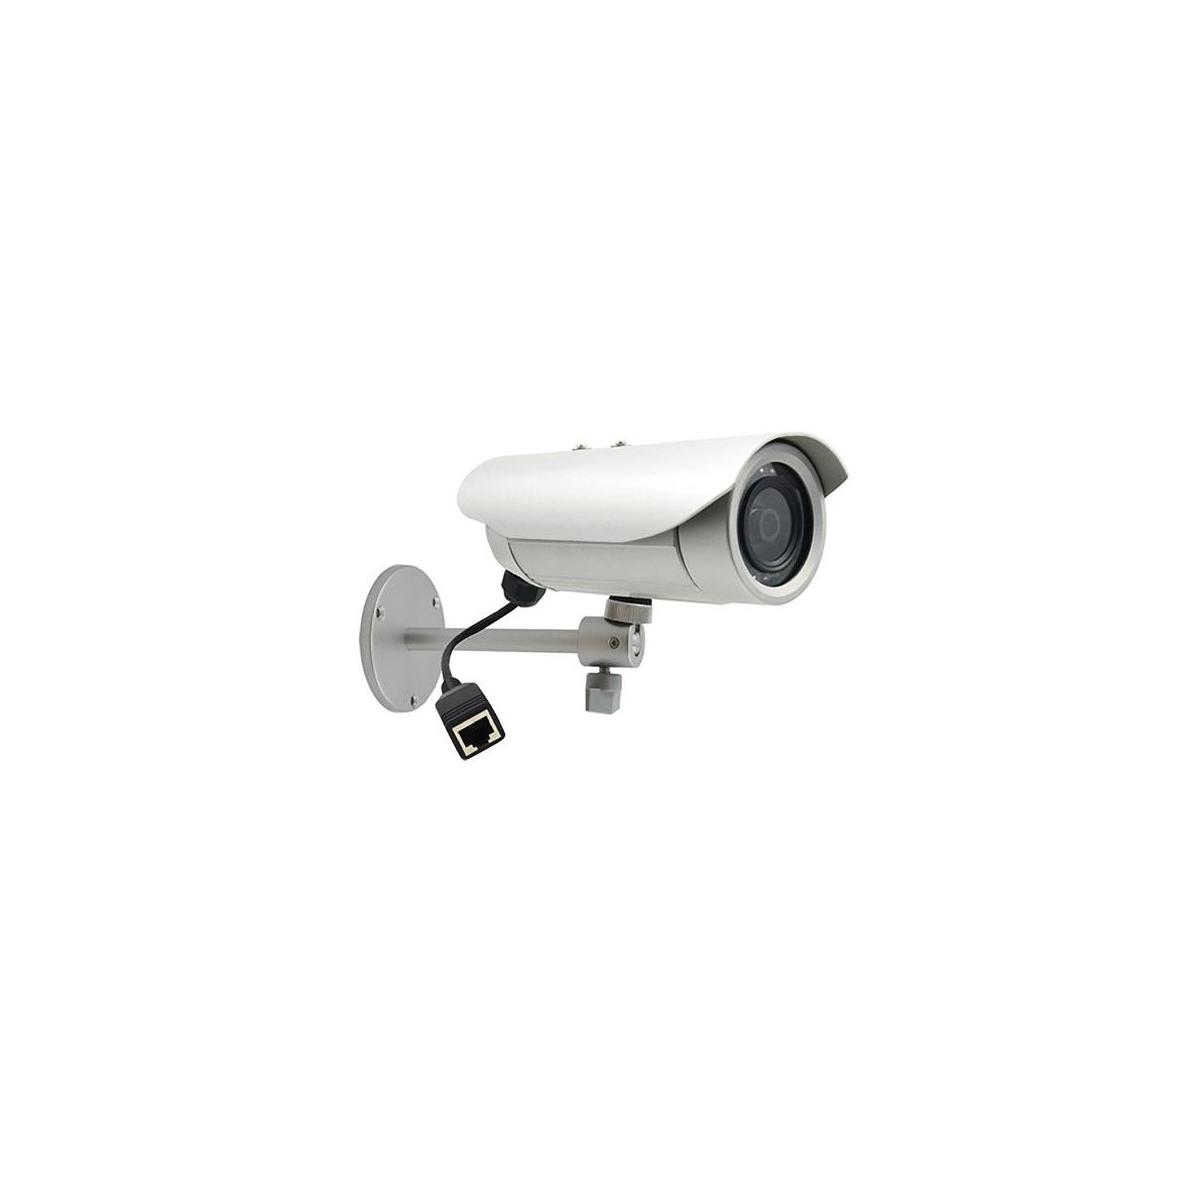 Image of ACTi E35 Day/Night Outdoor IP Bullet Camera